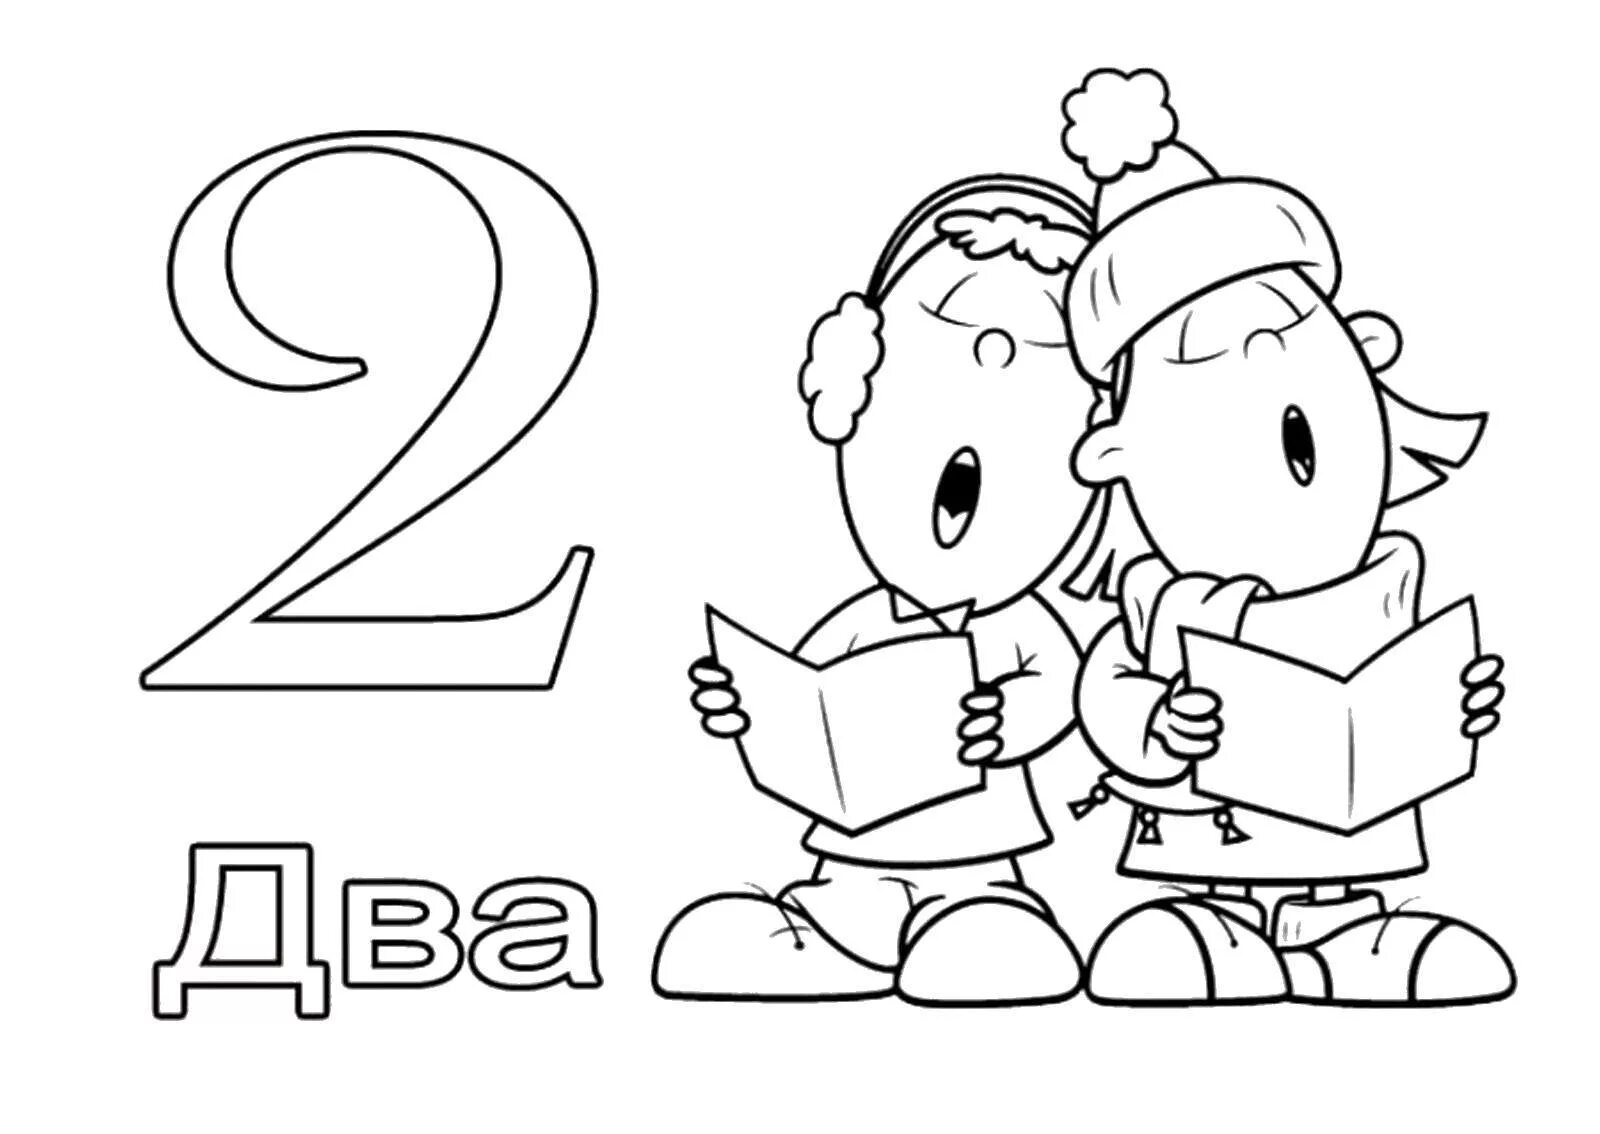 Coloring fun number in english for kids